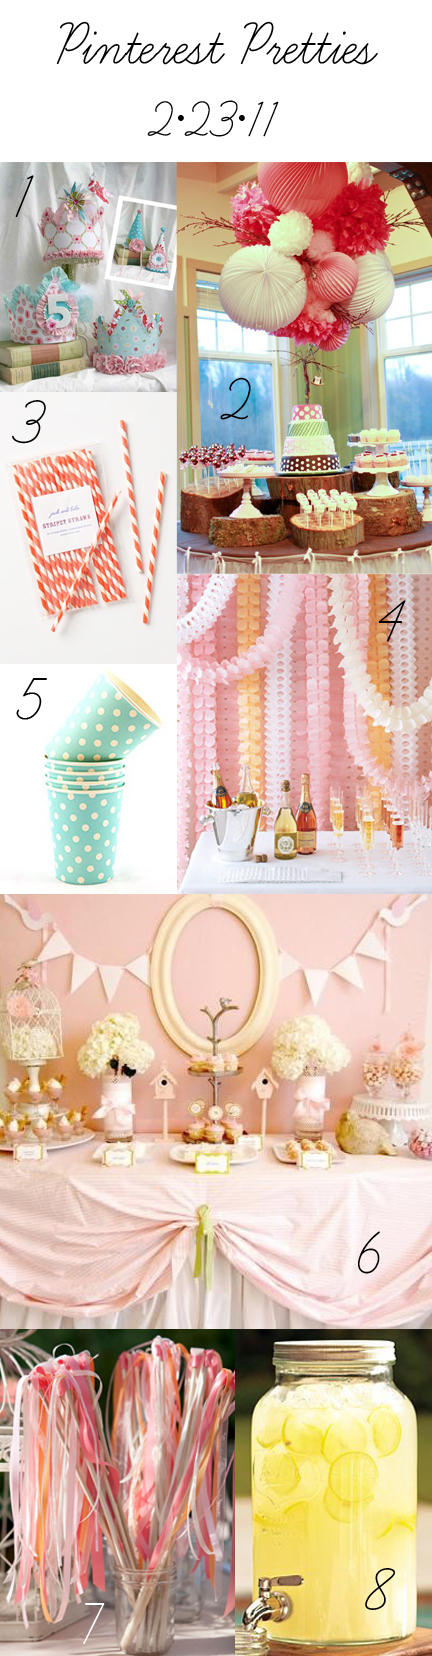 Pins from Pinterest about parties